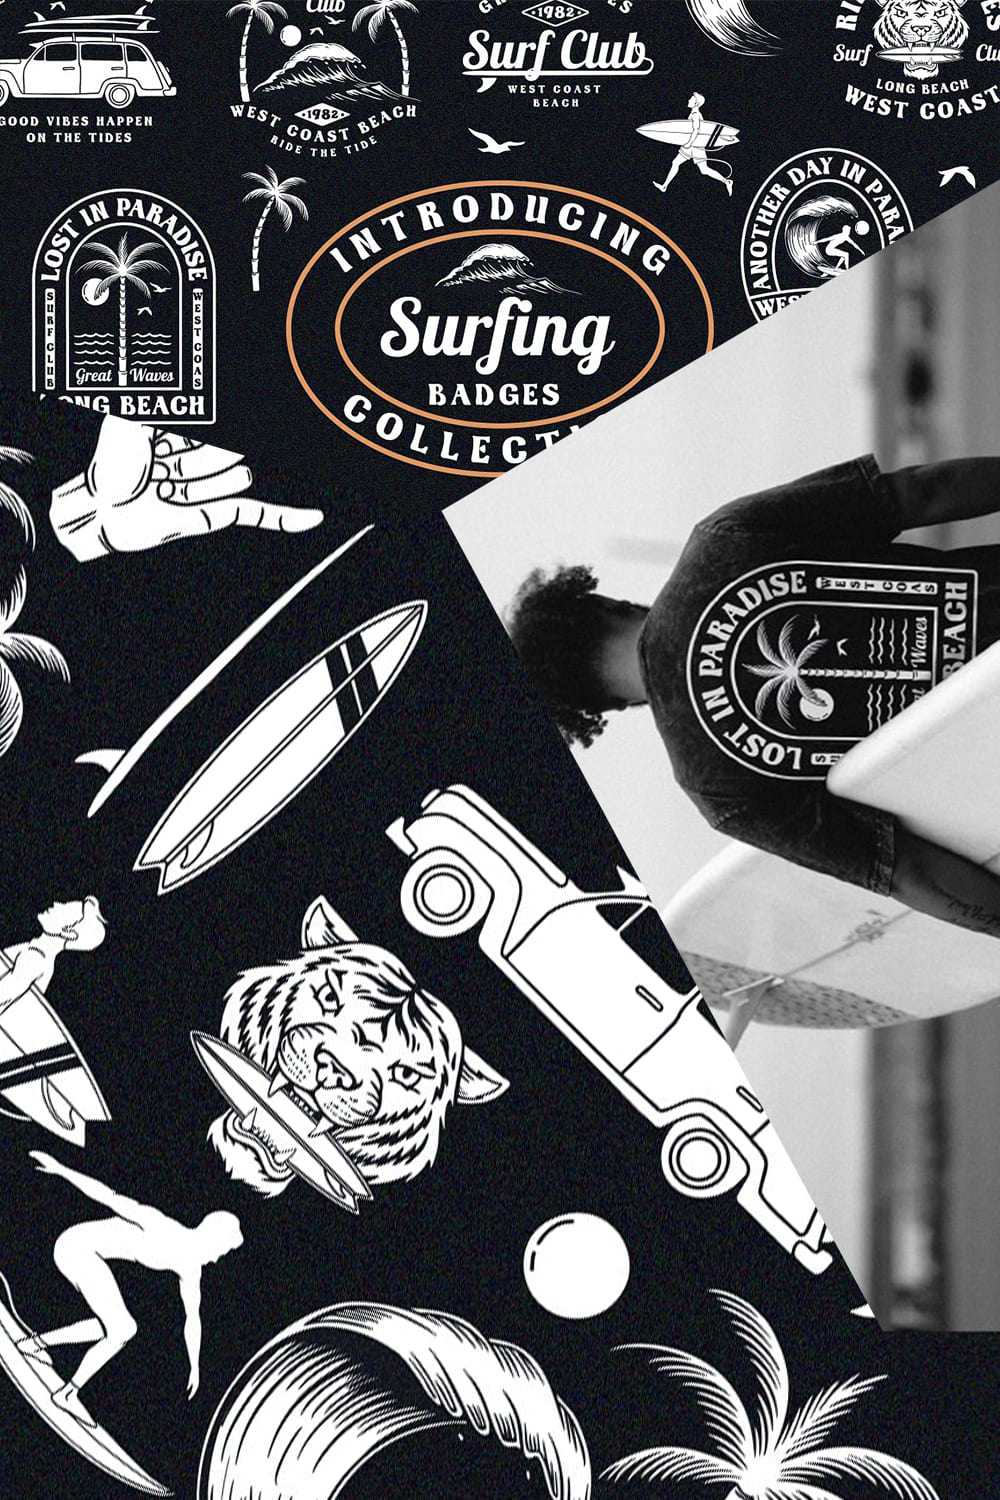 Really cool surfing logo collection.